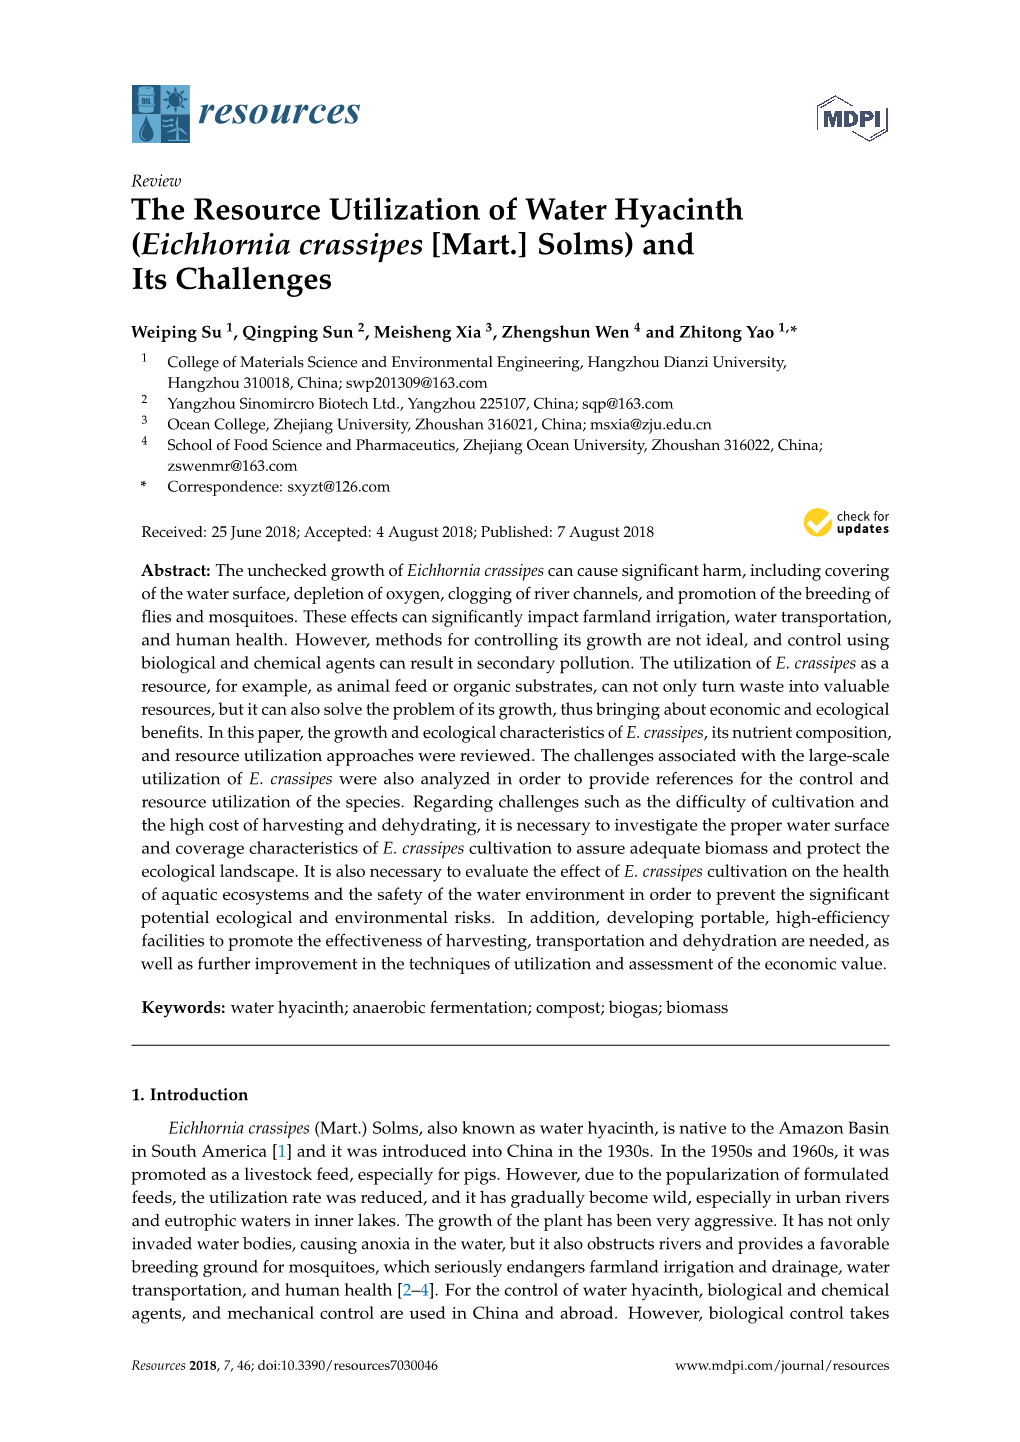 The Resource Utilization of Water Hyacinth (Eichhornia Crassipes [Mart.] Solms) and Its Challenges